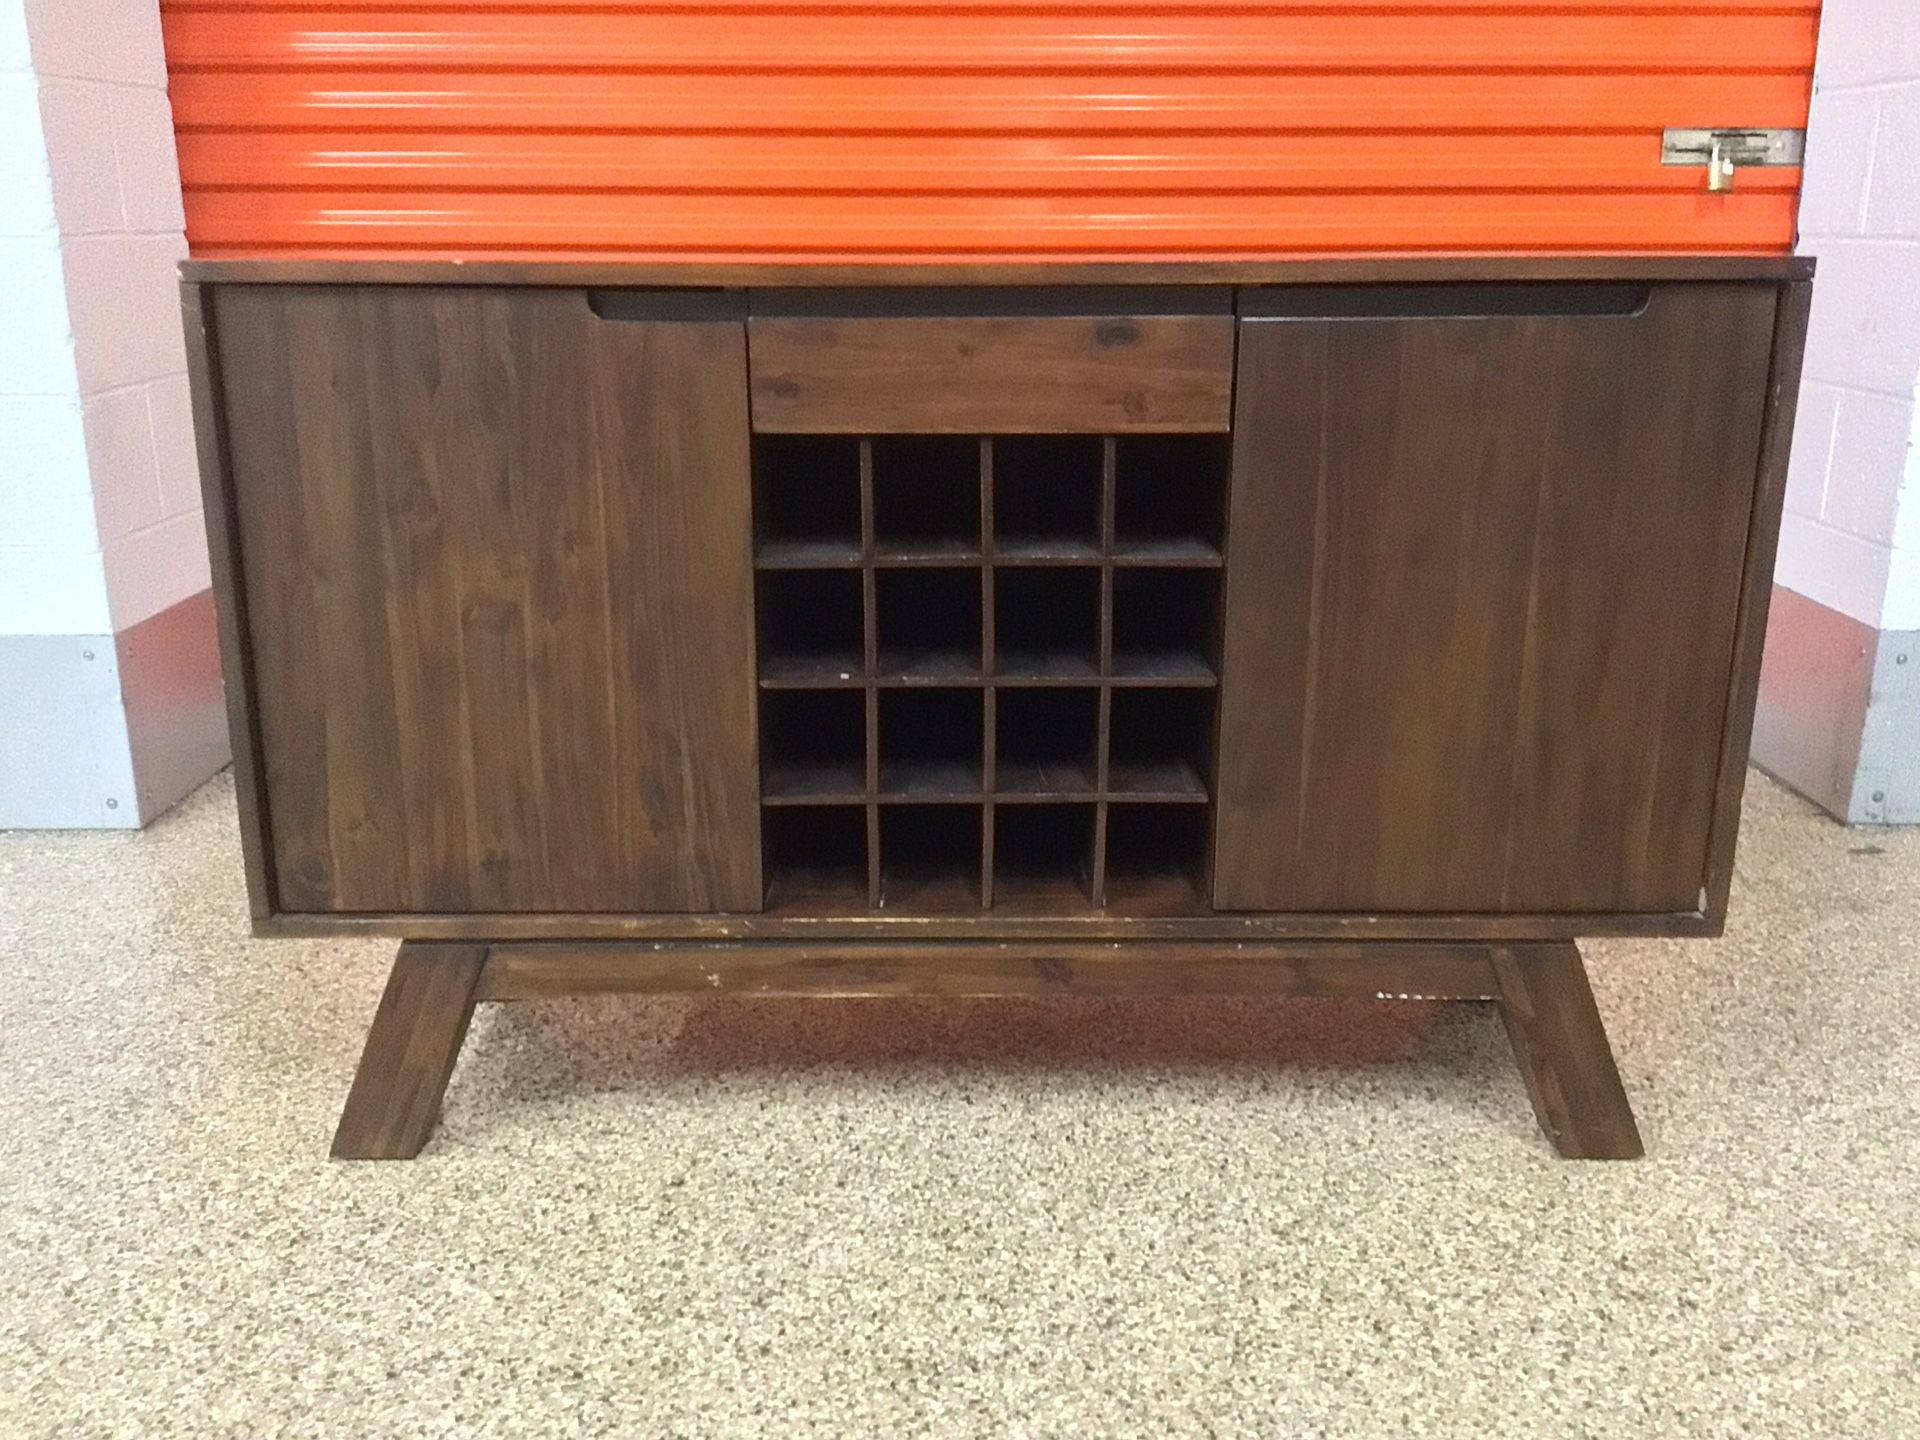 Wood Buffet With Wine Rack - Will Deliver